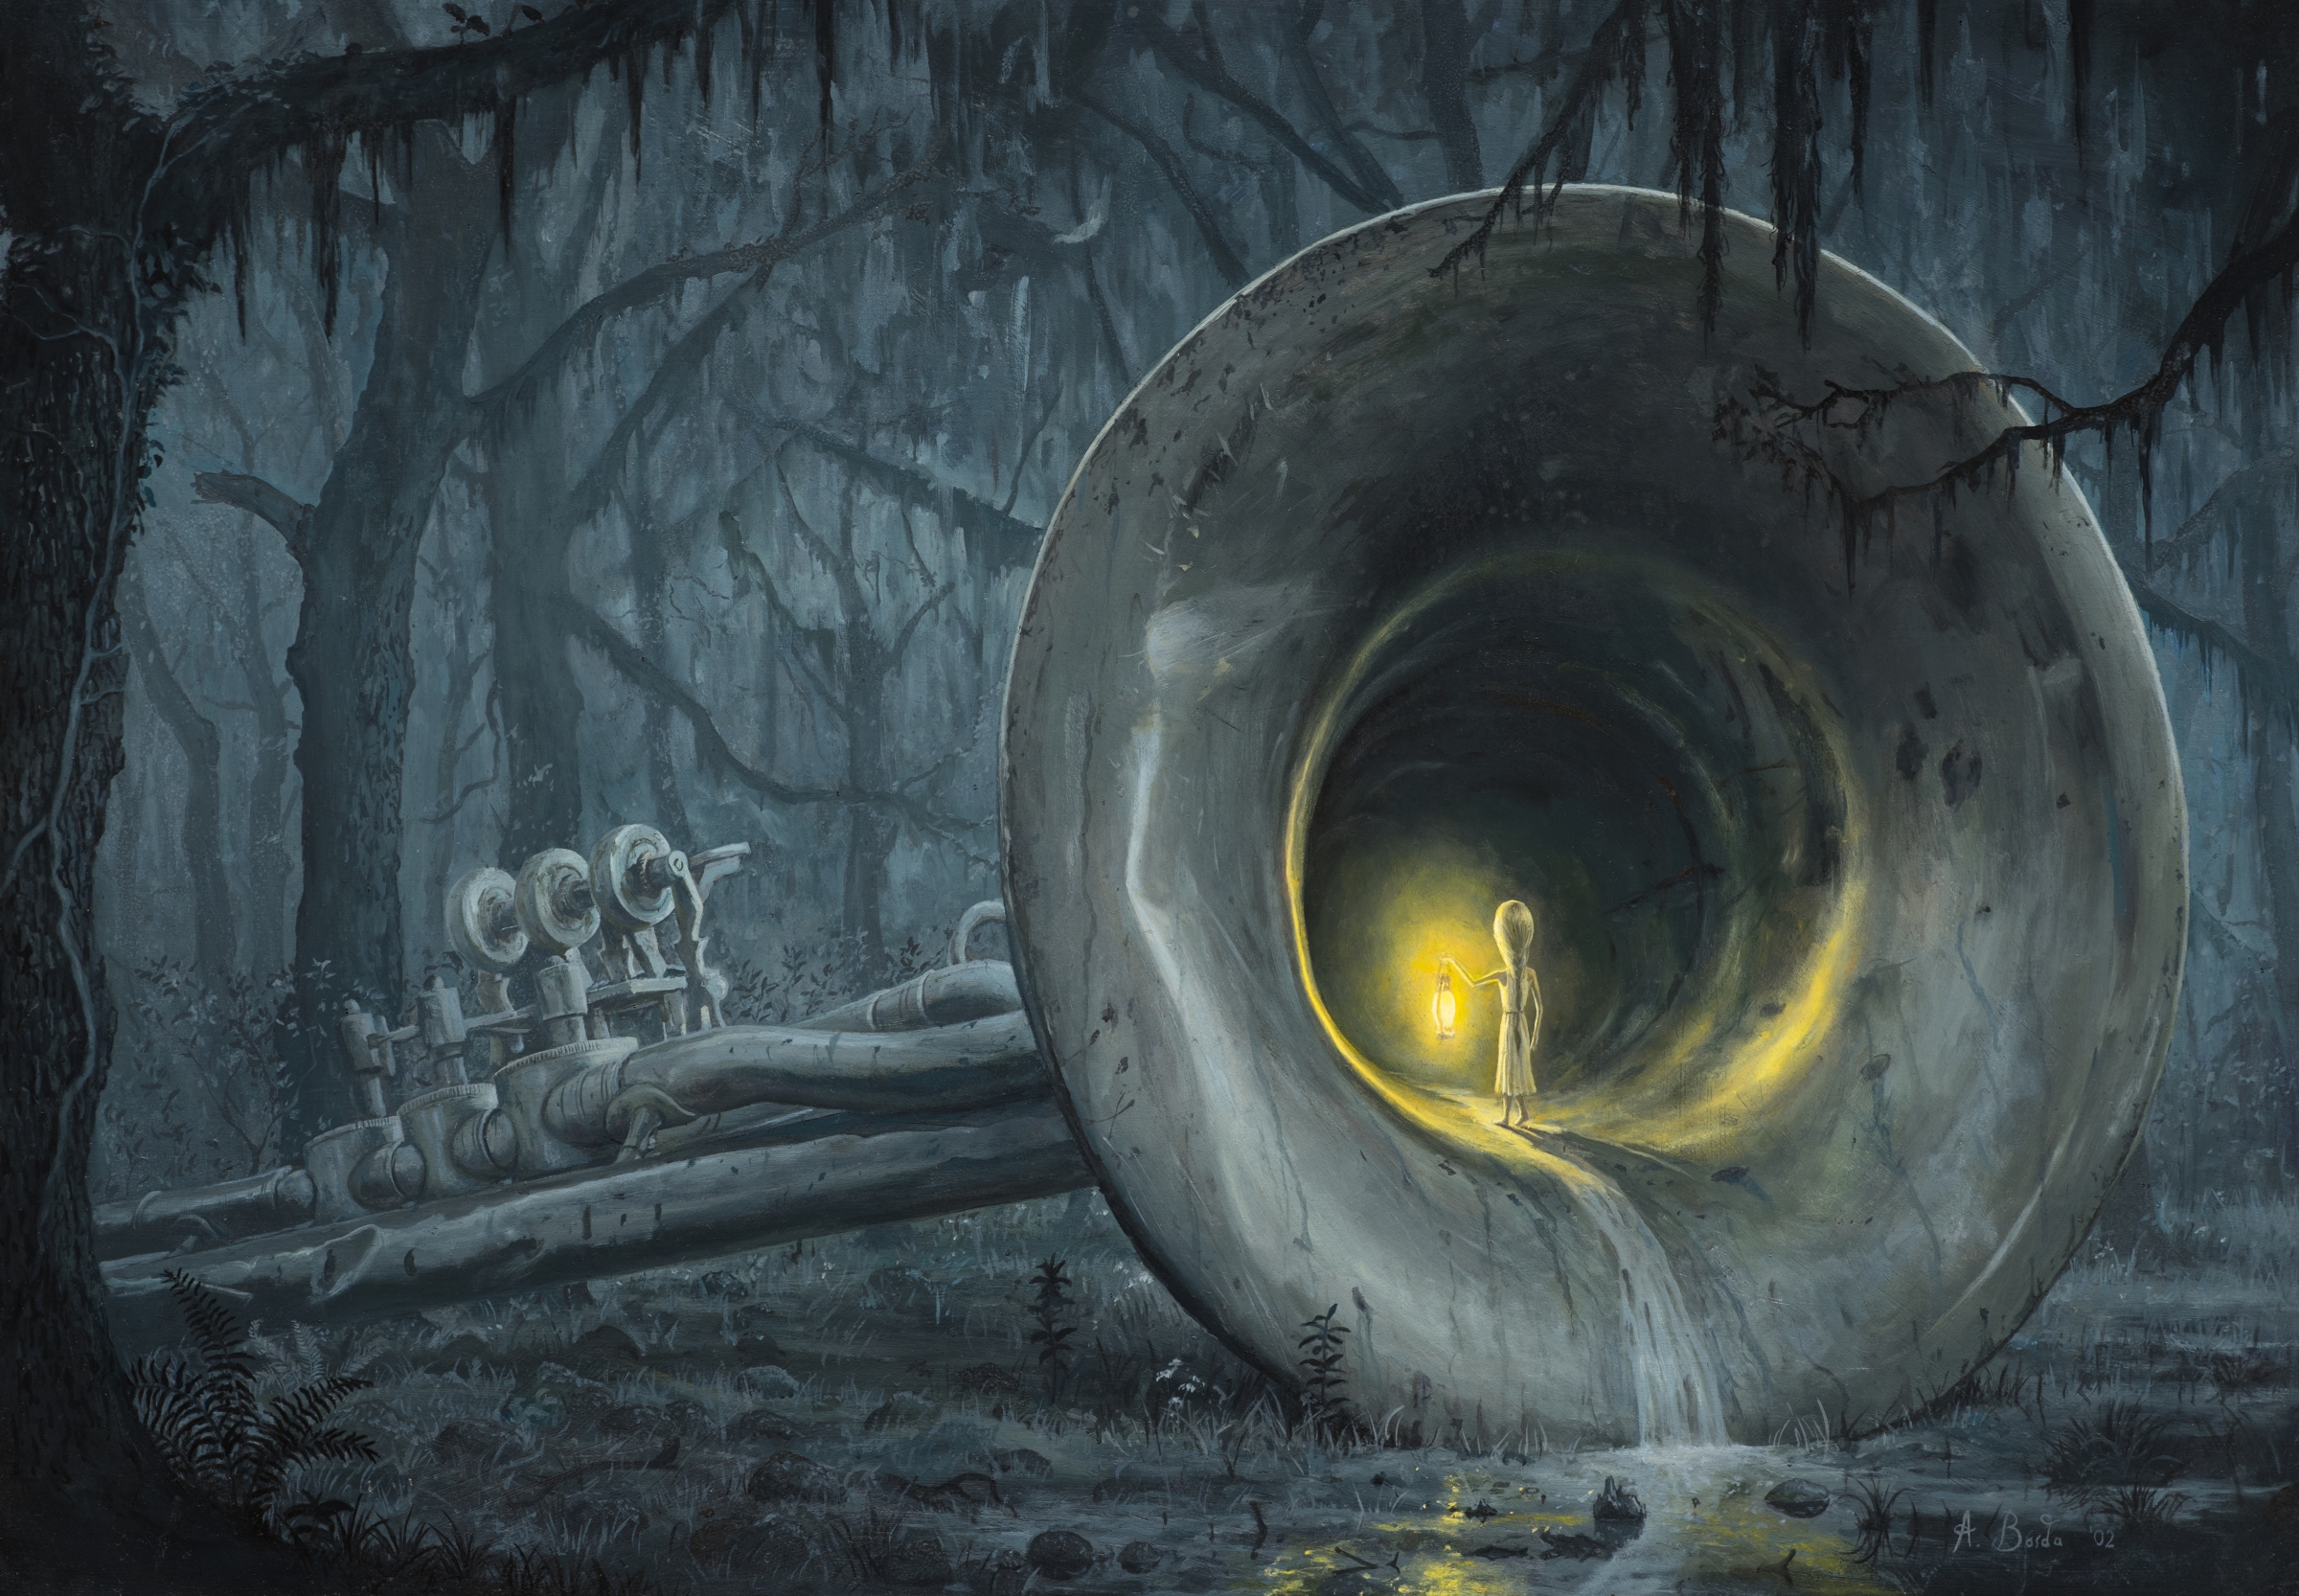 Artwork Painting Adrian Borda Surreal Musical Instrument Trees Trumpets Lights Spooky Giant Children 2400x1666